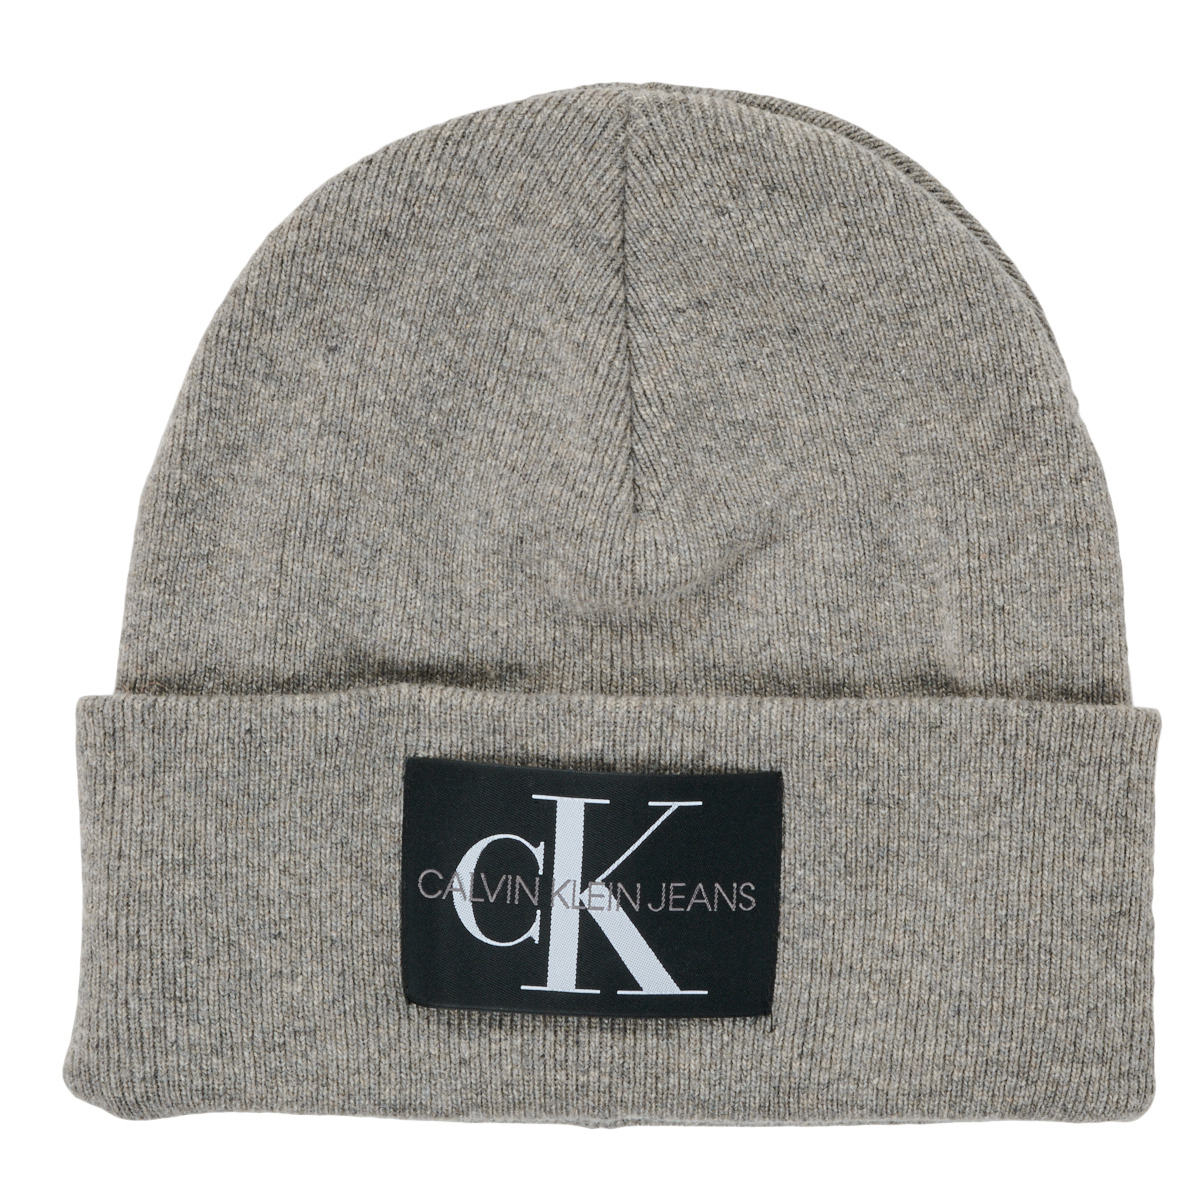 Calvin Klein Jeans MONOLOGO PATCH NON-RIB BEANIE Grey - Free delivery |  Spartoo NET ! - Clothes accessories hats Men